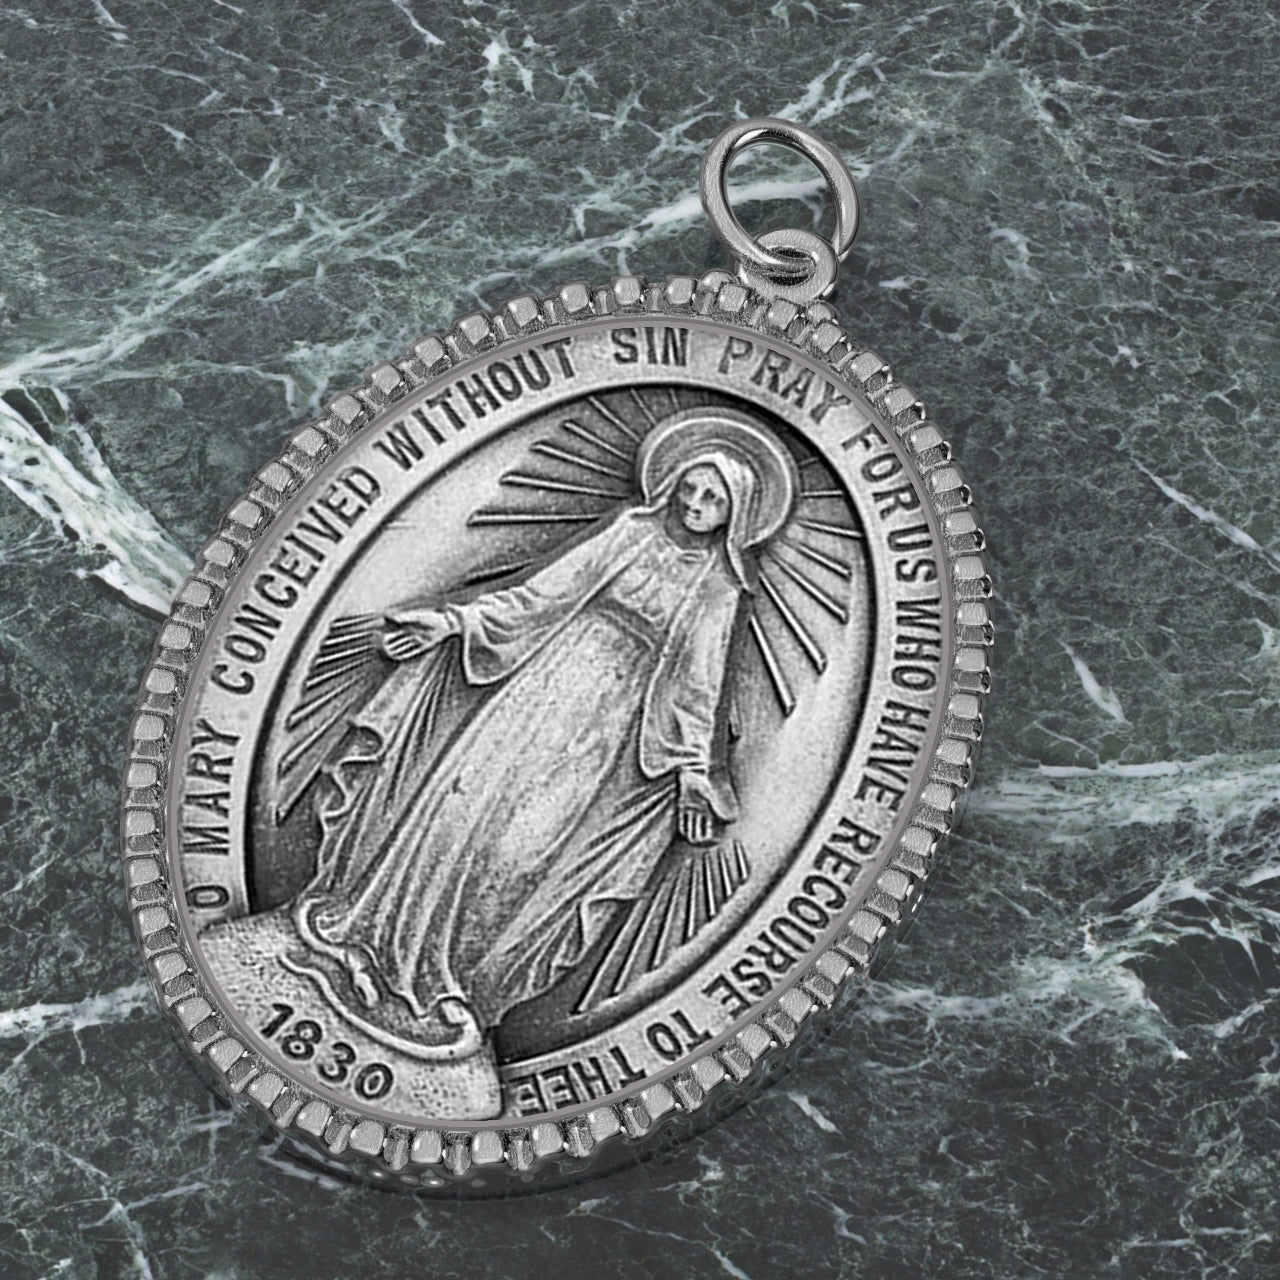 Extra Large Ladies 925 Sterling Silver Oval Miraculous Virgin Mary Medal Pendant Necklace, 39mm - US Jewels